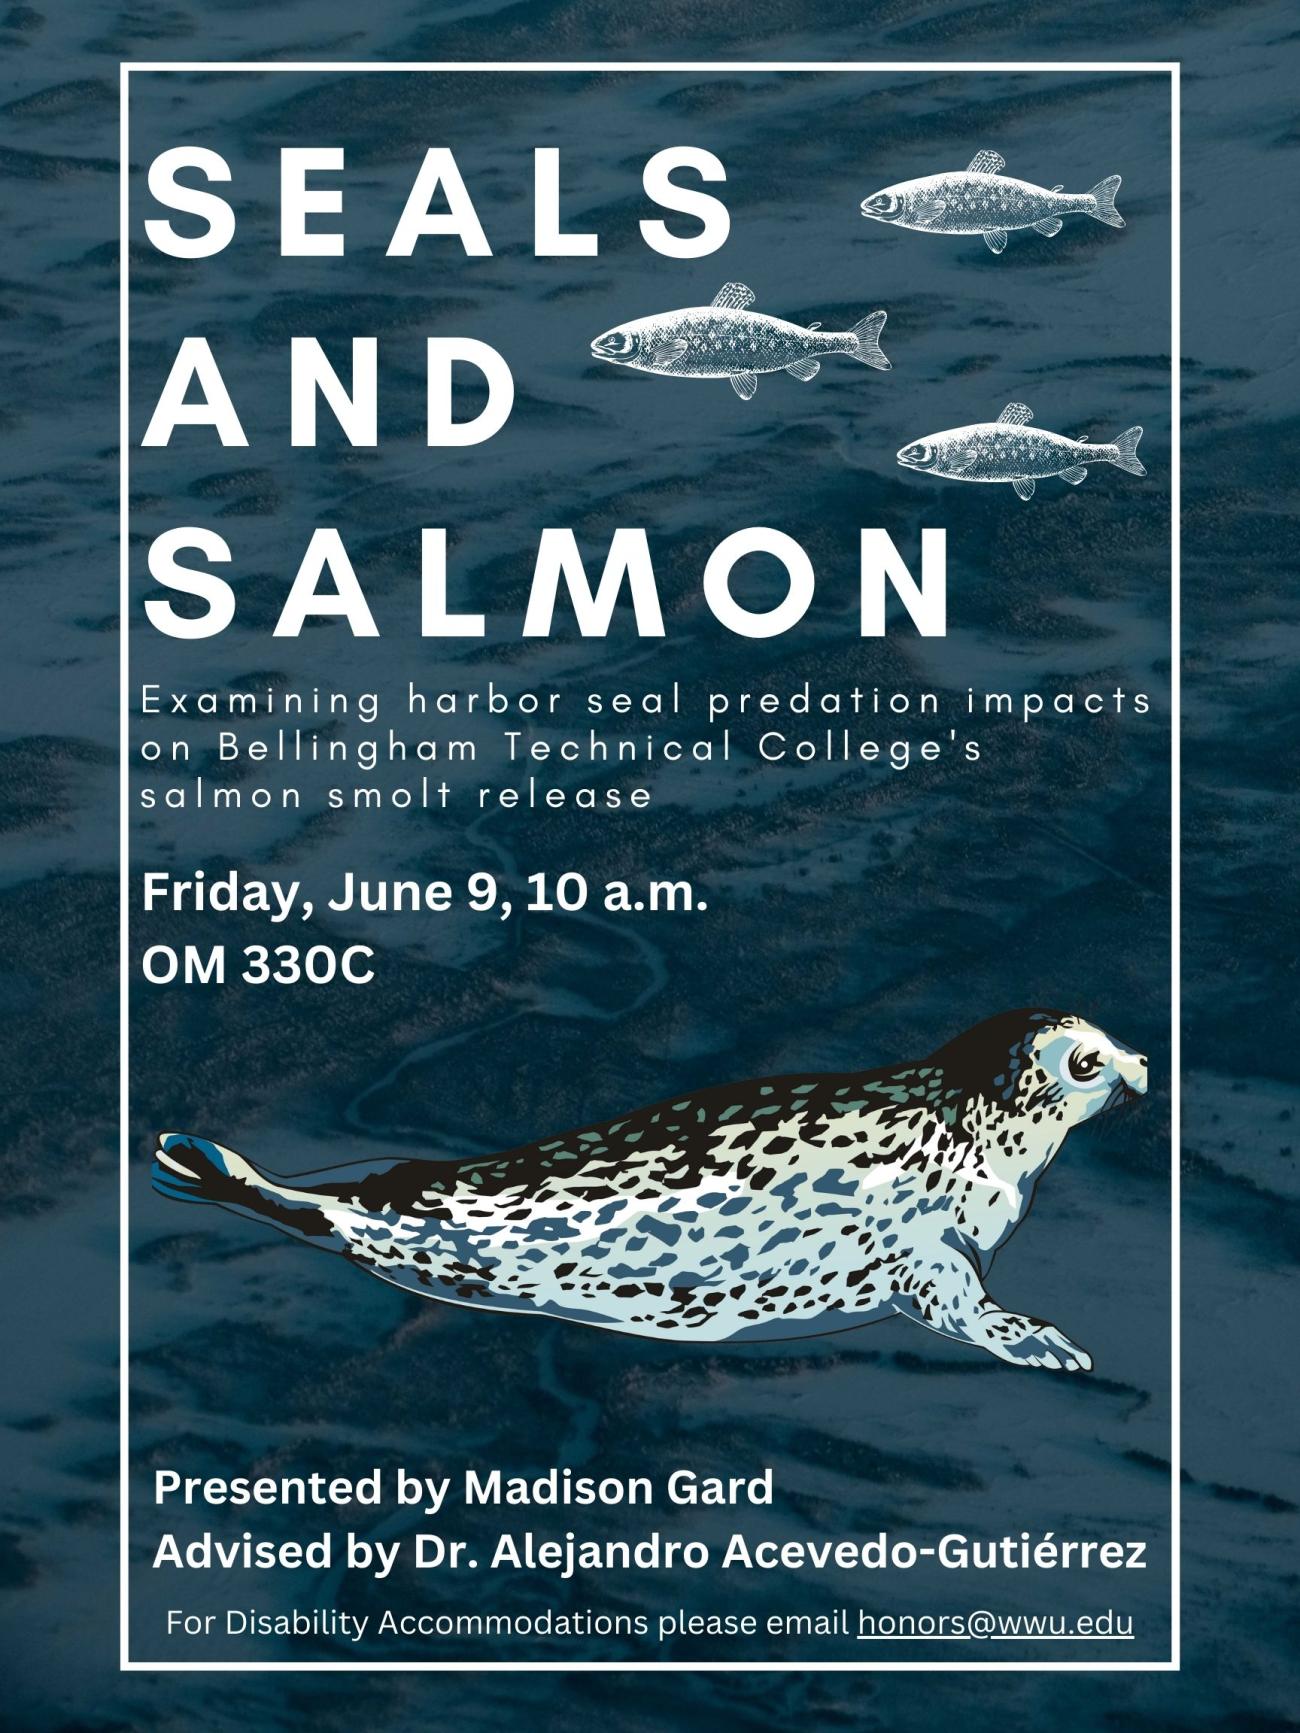 A dark blue poster with water surface texturing with white line sketches of three salmon smolt and a harbor seal. Text reads "Seals and Salmon: Examining harbor seal predation impacts on Bellingham Technical College's salmon smolt release. Friday, June 9th, 10:00 a.m. OM 330C. Presented by Madison Gard. Advised by Dr. Alejandro Acevedo-Gutiérrez. For disability accommodations, please email honors@wwu.edu"